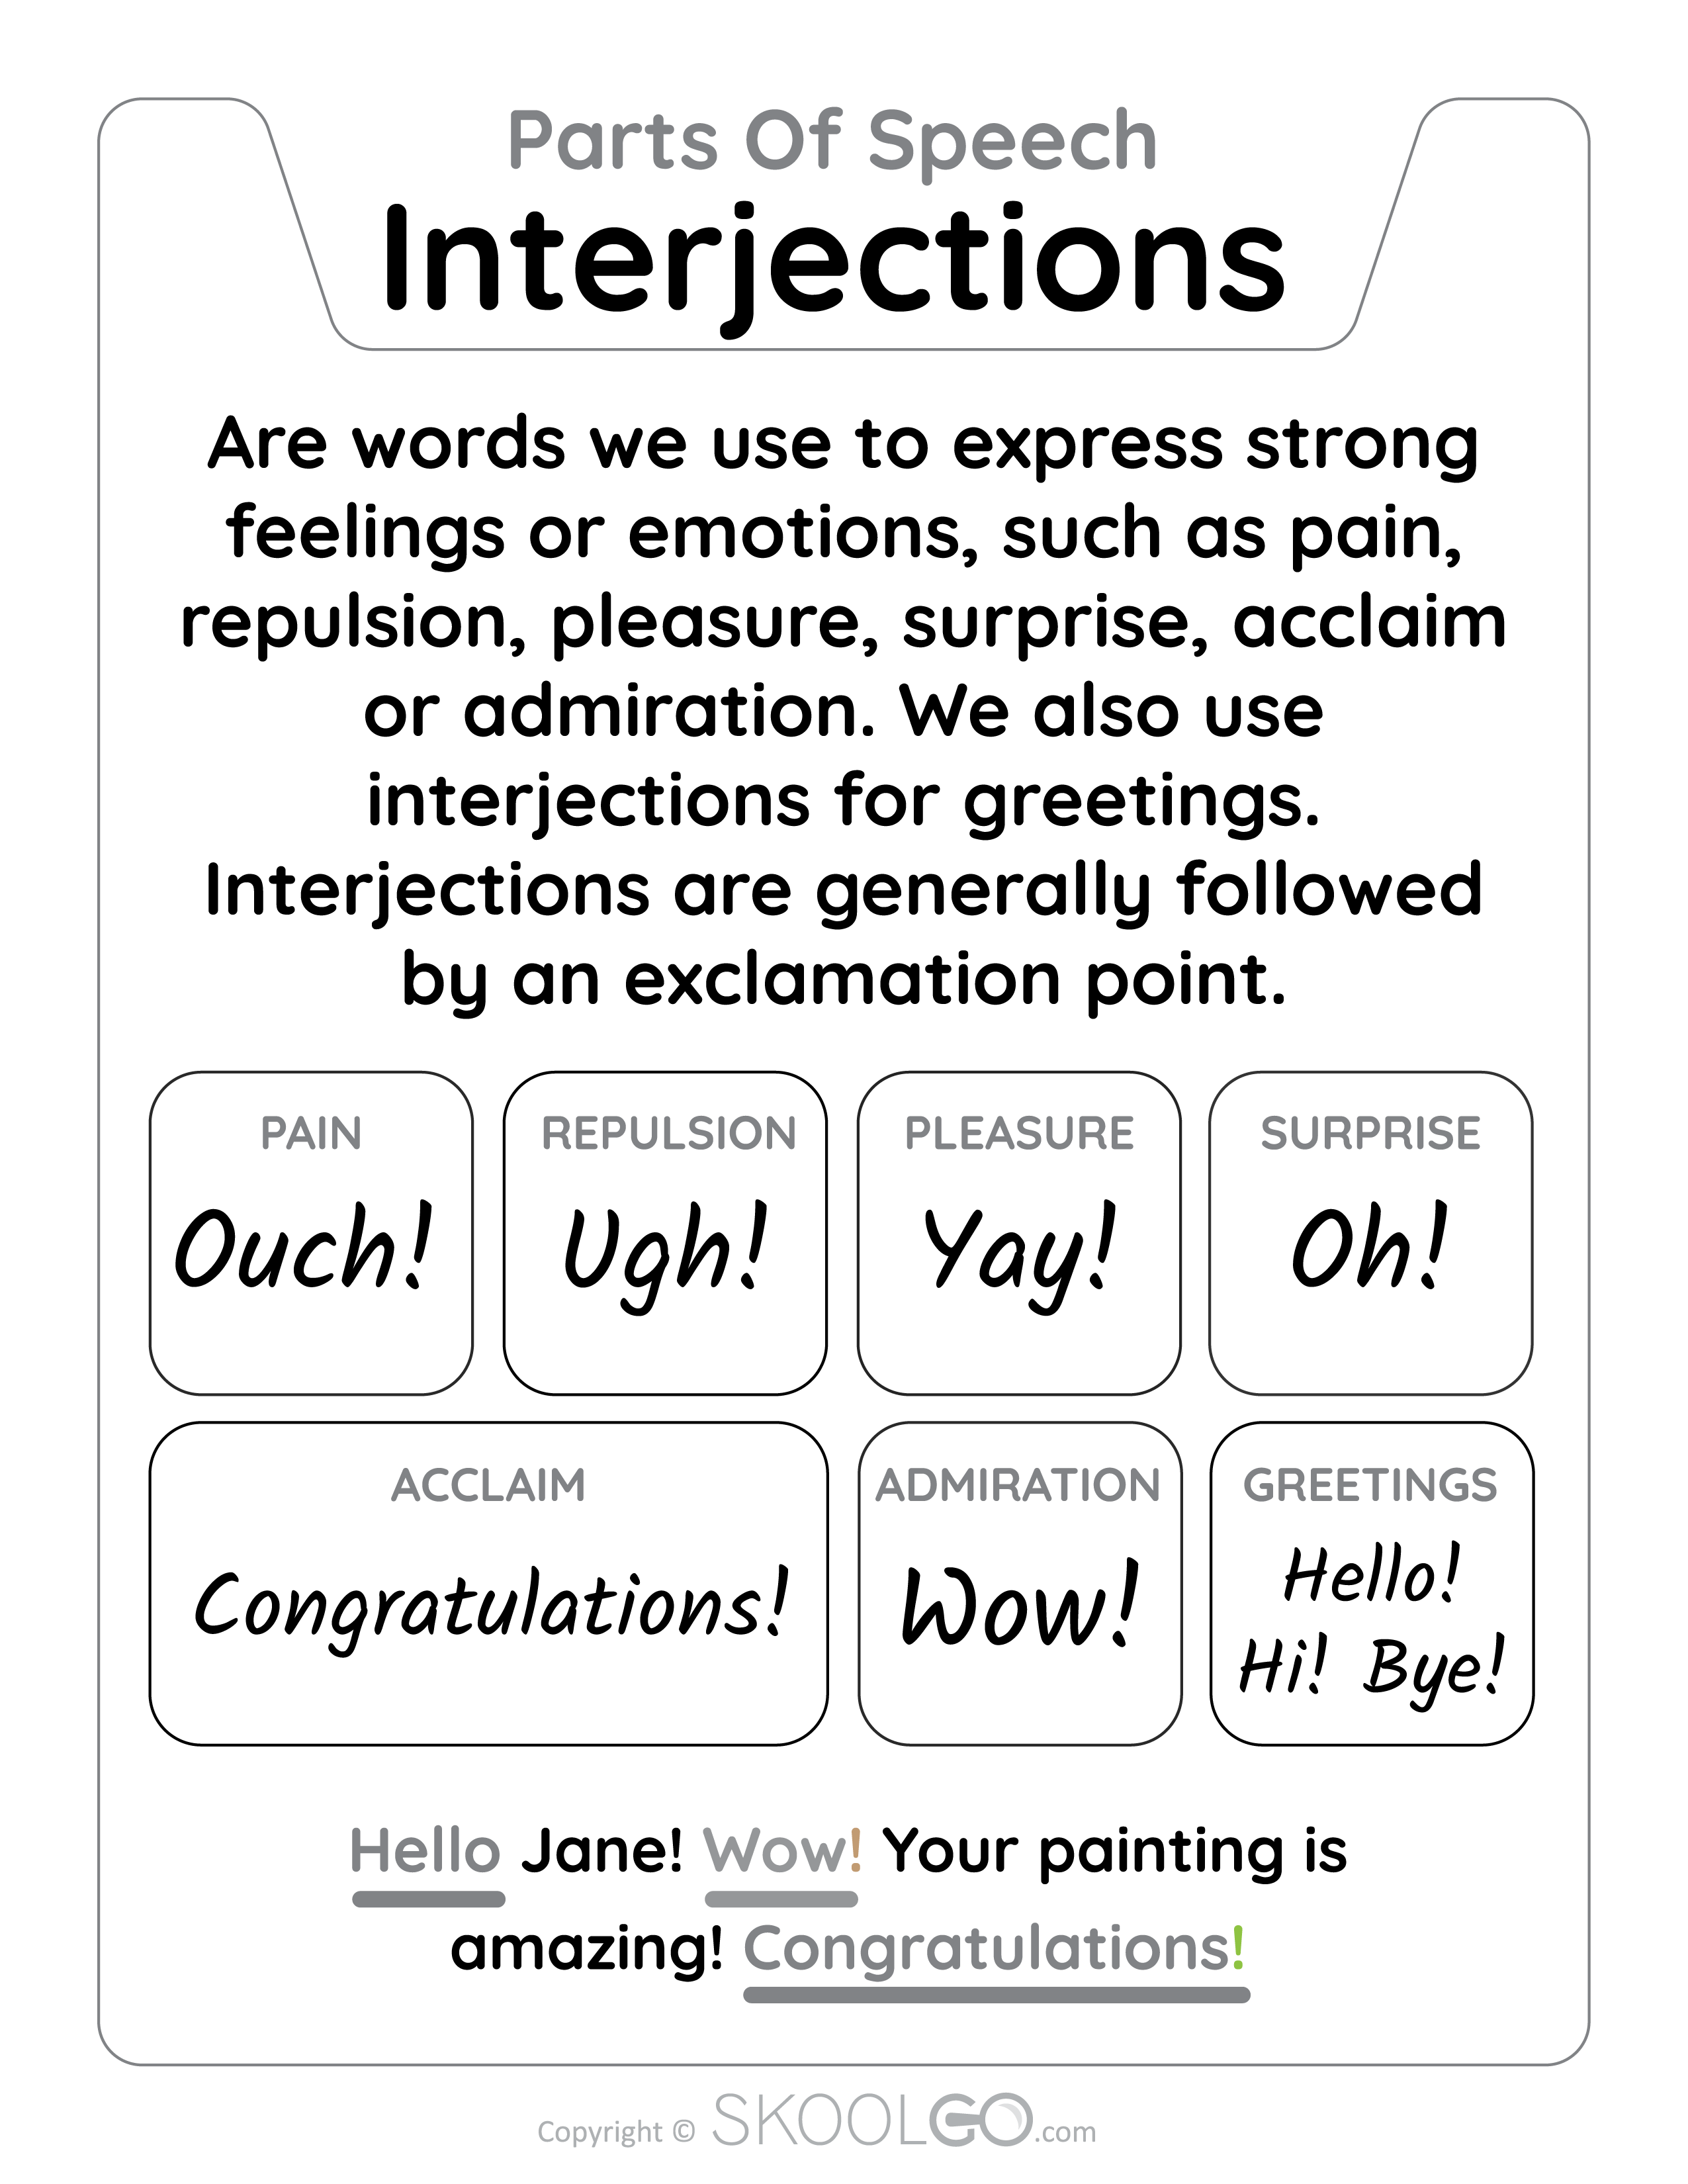 Interjections - Parts Of Speech - Free Learning Classroom Poster